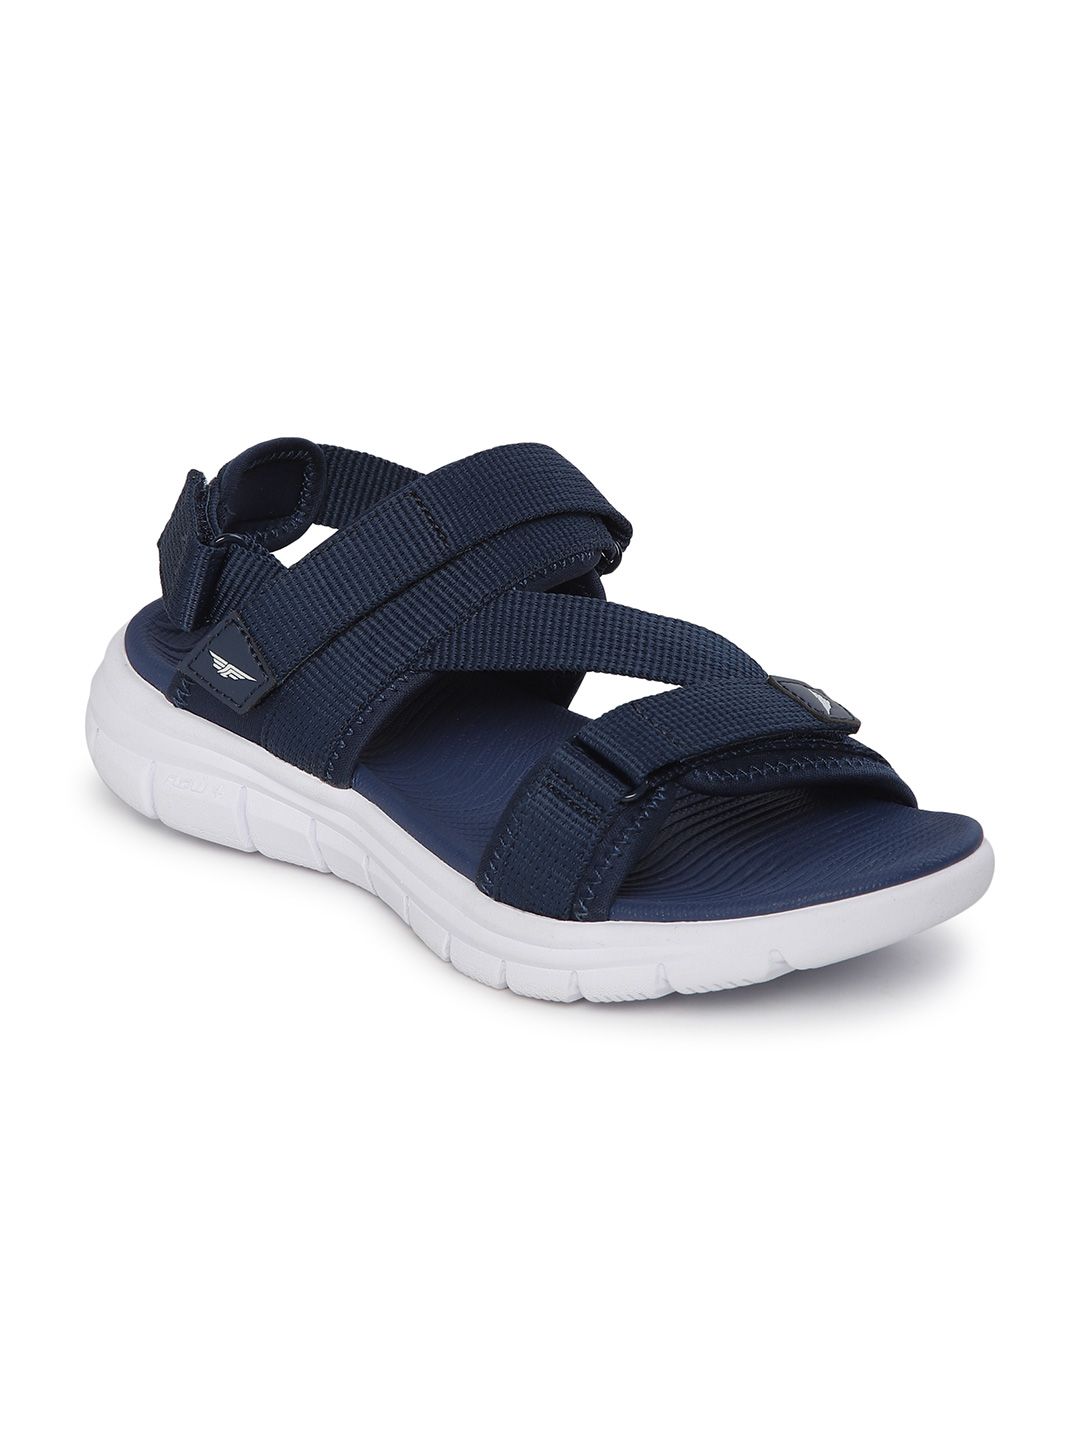 Red Tape Women Navy Blue Solid Sports Sandals Price in India